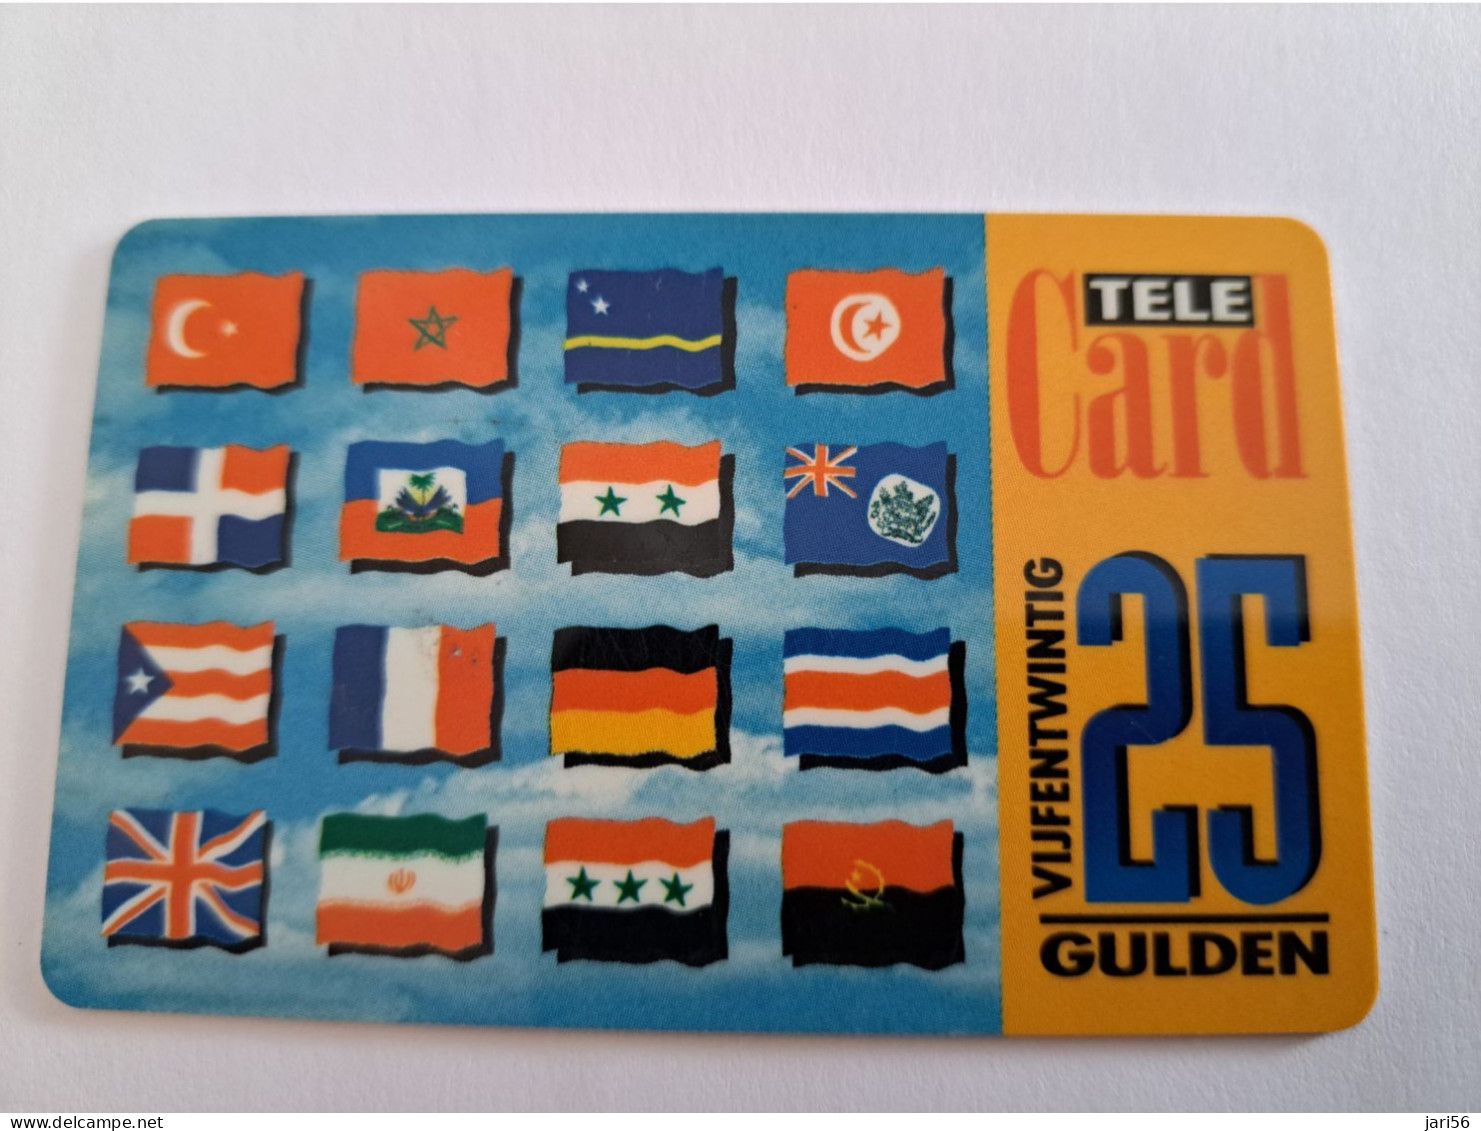 NETHERLANDS/ PREPAID/  HFL 25,- ,- /FLAGS OF THE DIFFERENT COUNTRYS/   - USED CARD  ** 13942** - Schede GSM, Prepagate E Ricariche